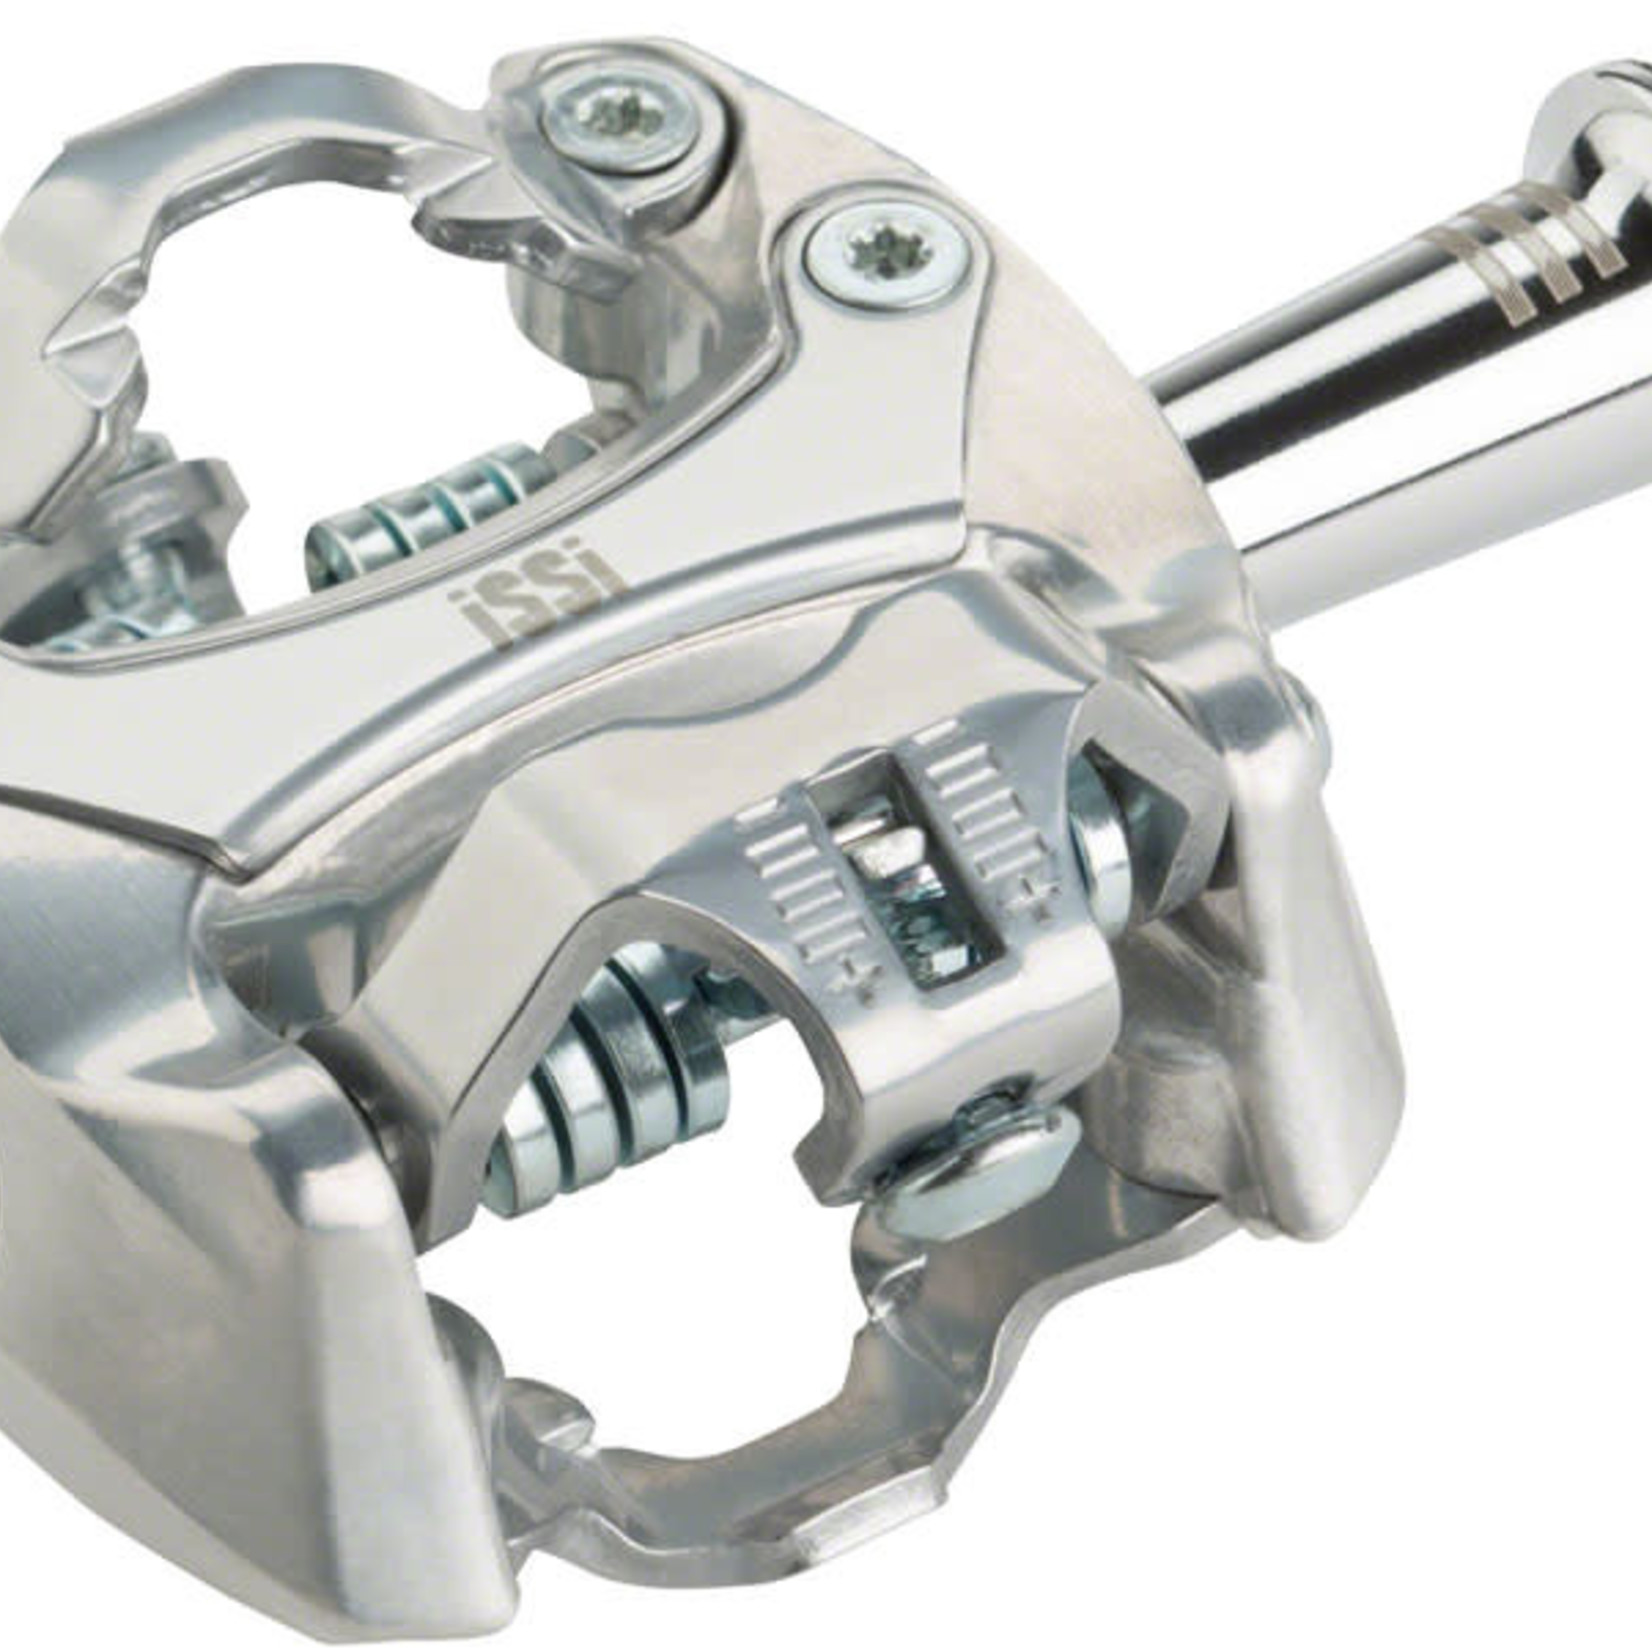 iSSi iSSi Flash III Pedals - Dual Sided Clipless, Aluminum, 9/16", Silver